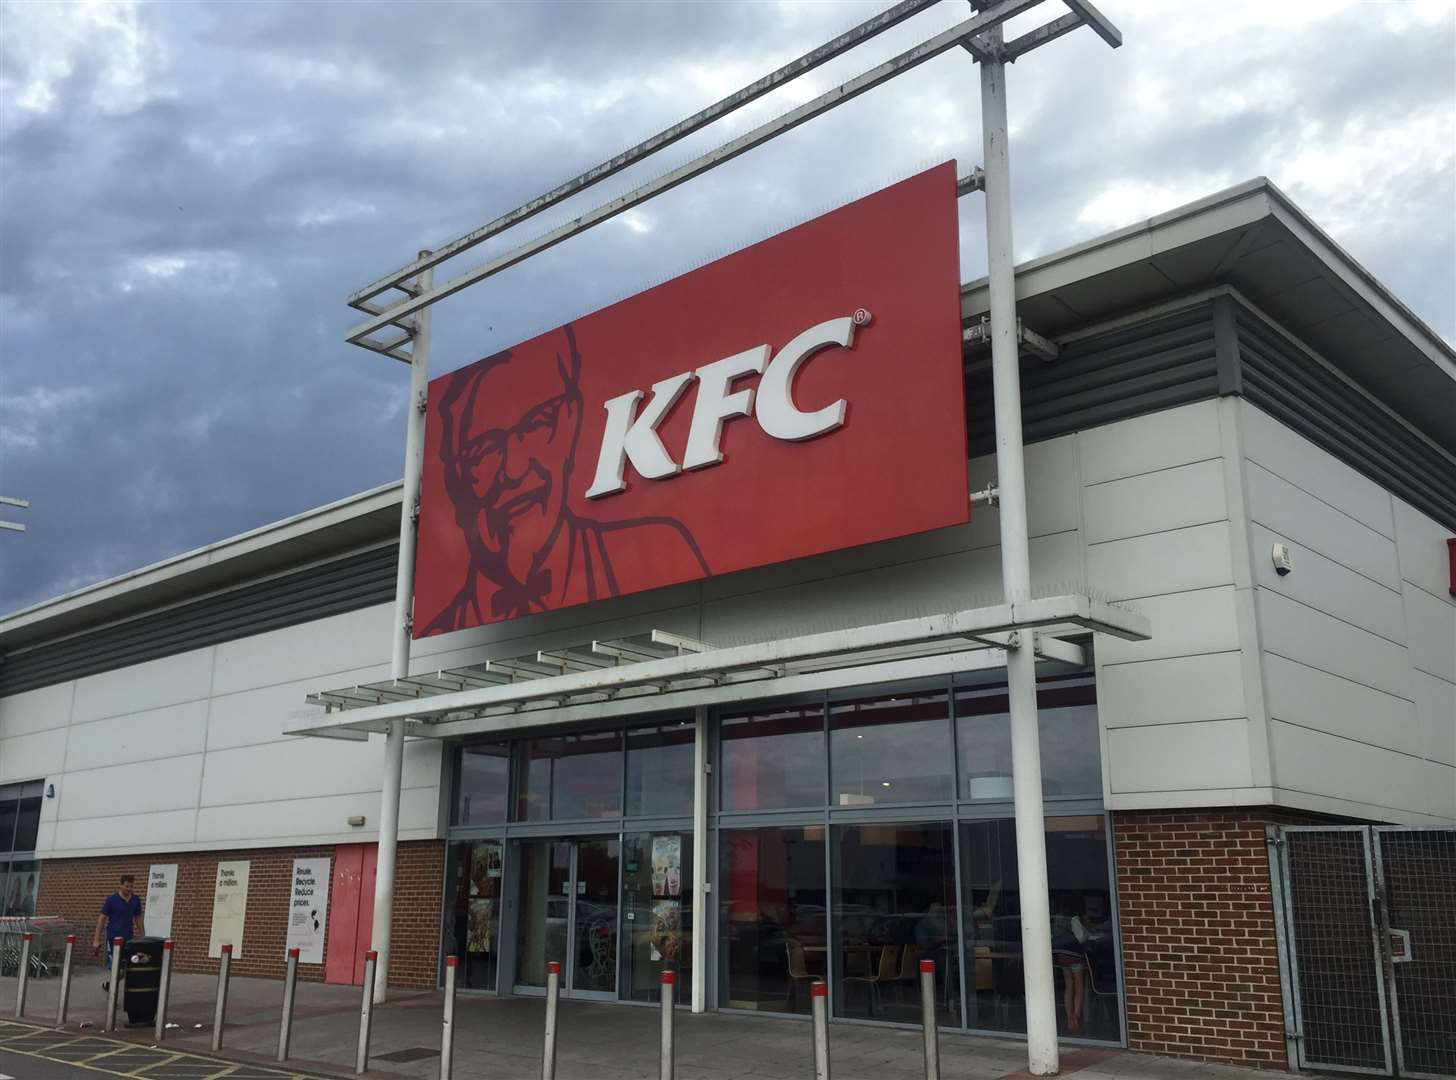 The attack happened outside the KFC outlet in Strood